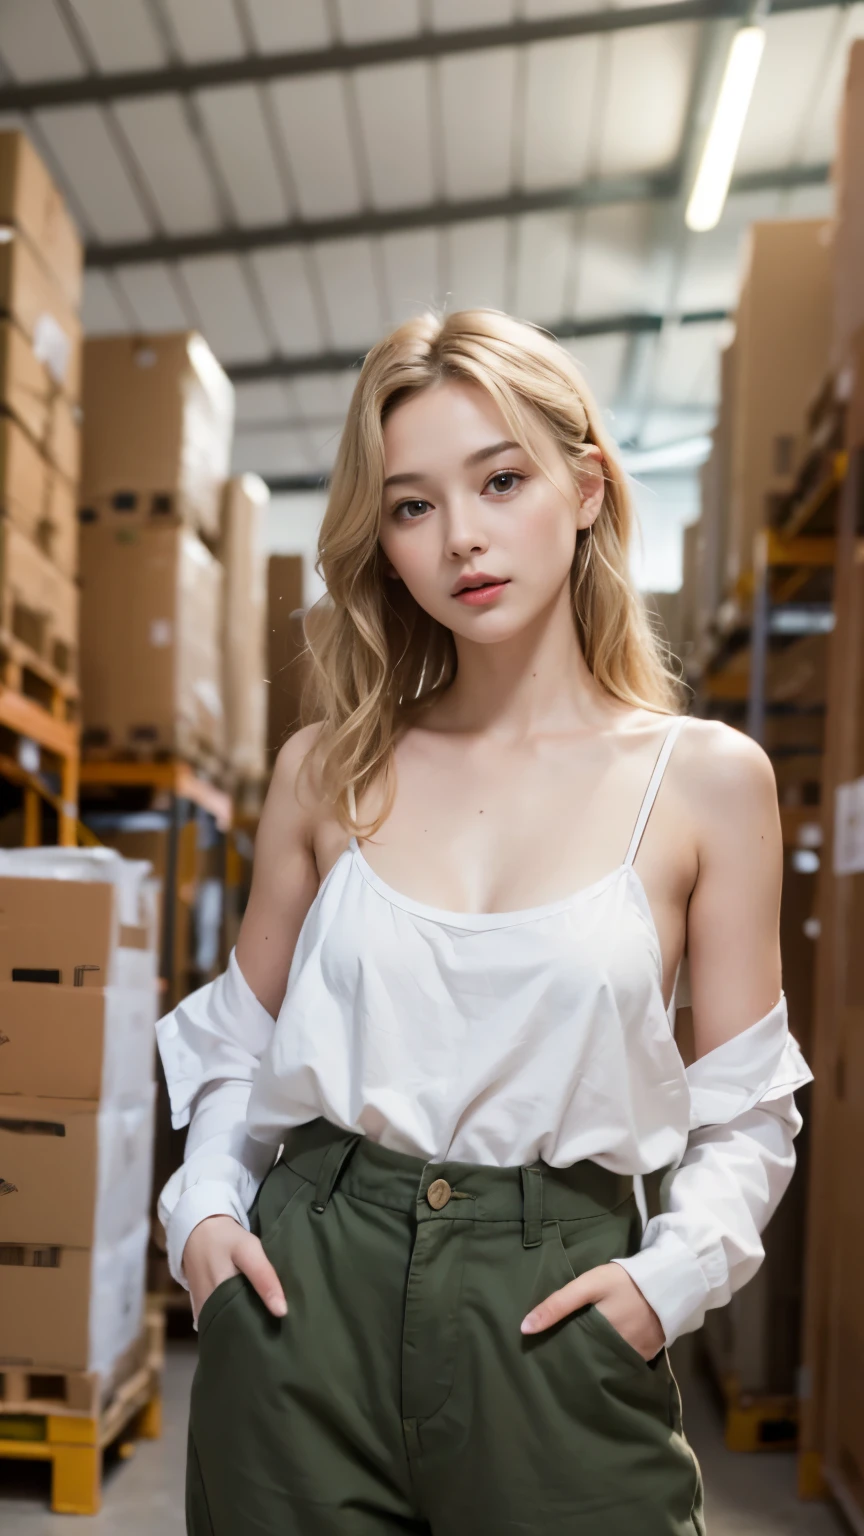 (((best quality, 8 thousand, masterpiece:1.4)), (20 year old woman), masterpiece, distinct, highres, high_quality, wide_shot, small_face, absurdly_short_hair, female, sagging_breasts, balancing, stretching, gentle_face, bare_shoulders, center_opening, downblouse, (blonde wavy very long hair), (Put your hands in your pockets), (C-com saggy breasts), Locked in the warehouse, 